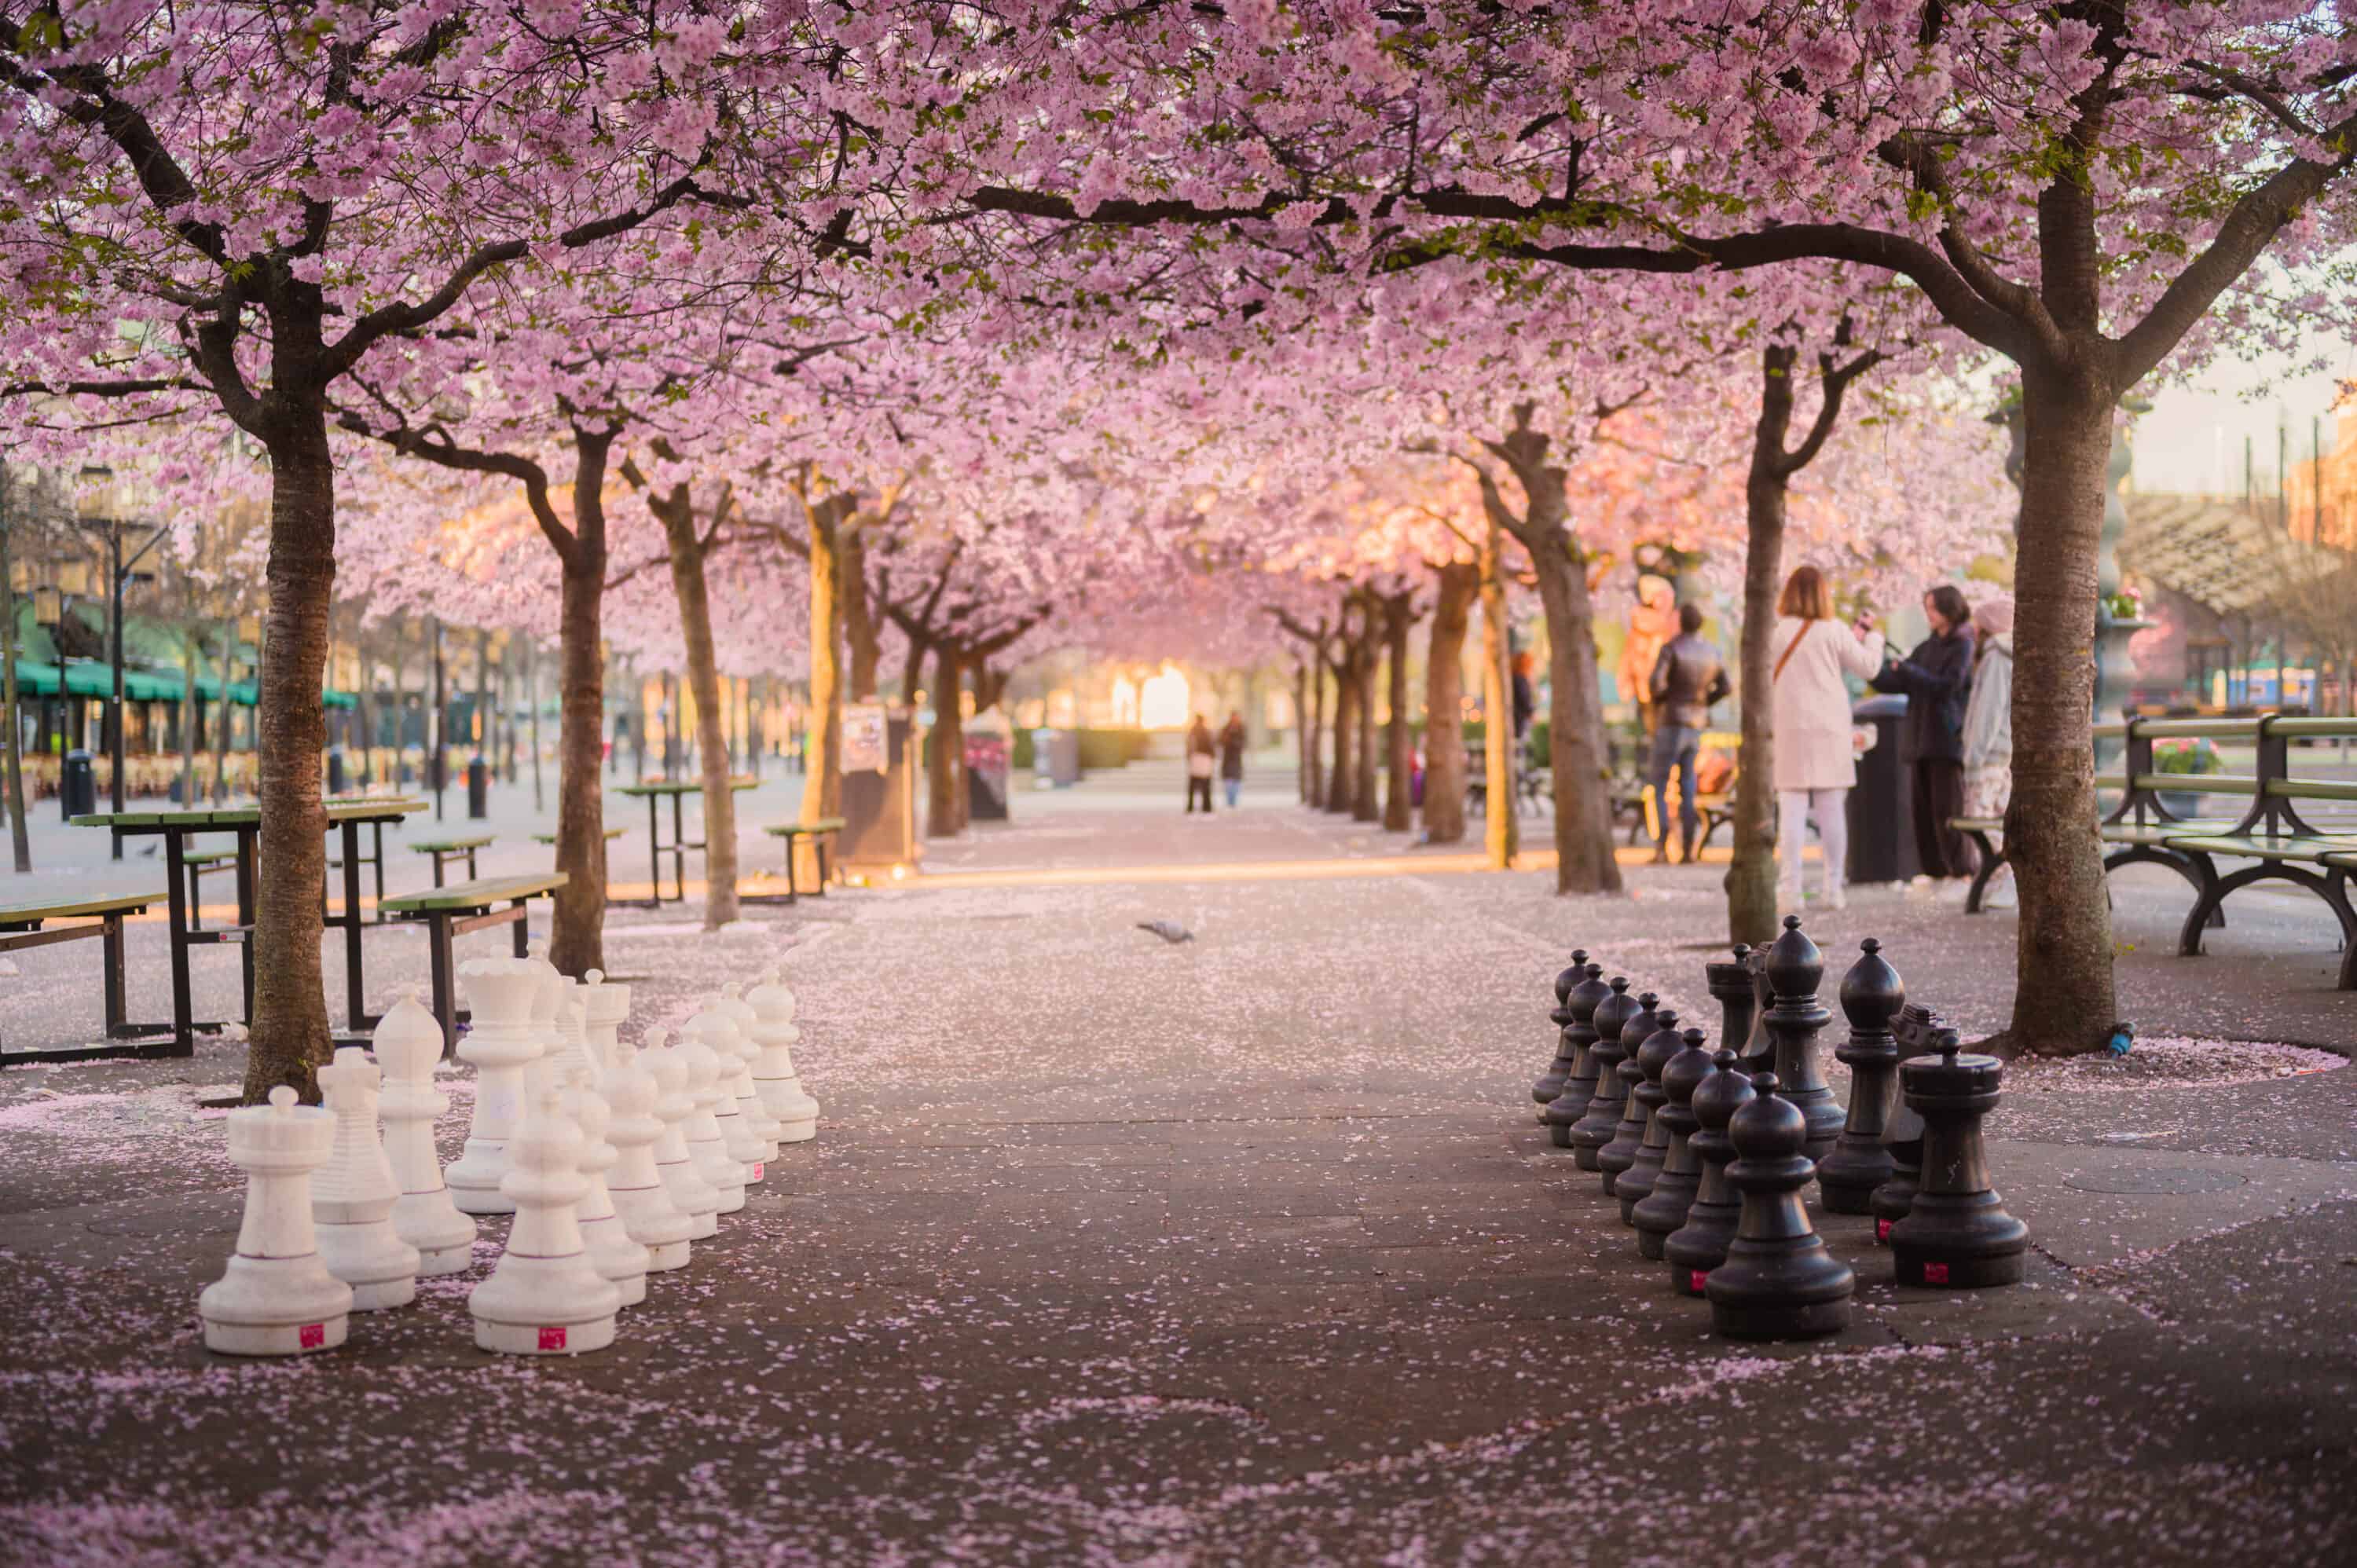 Cherry blossoms lining a path in a park in Stockholm, Sweden.